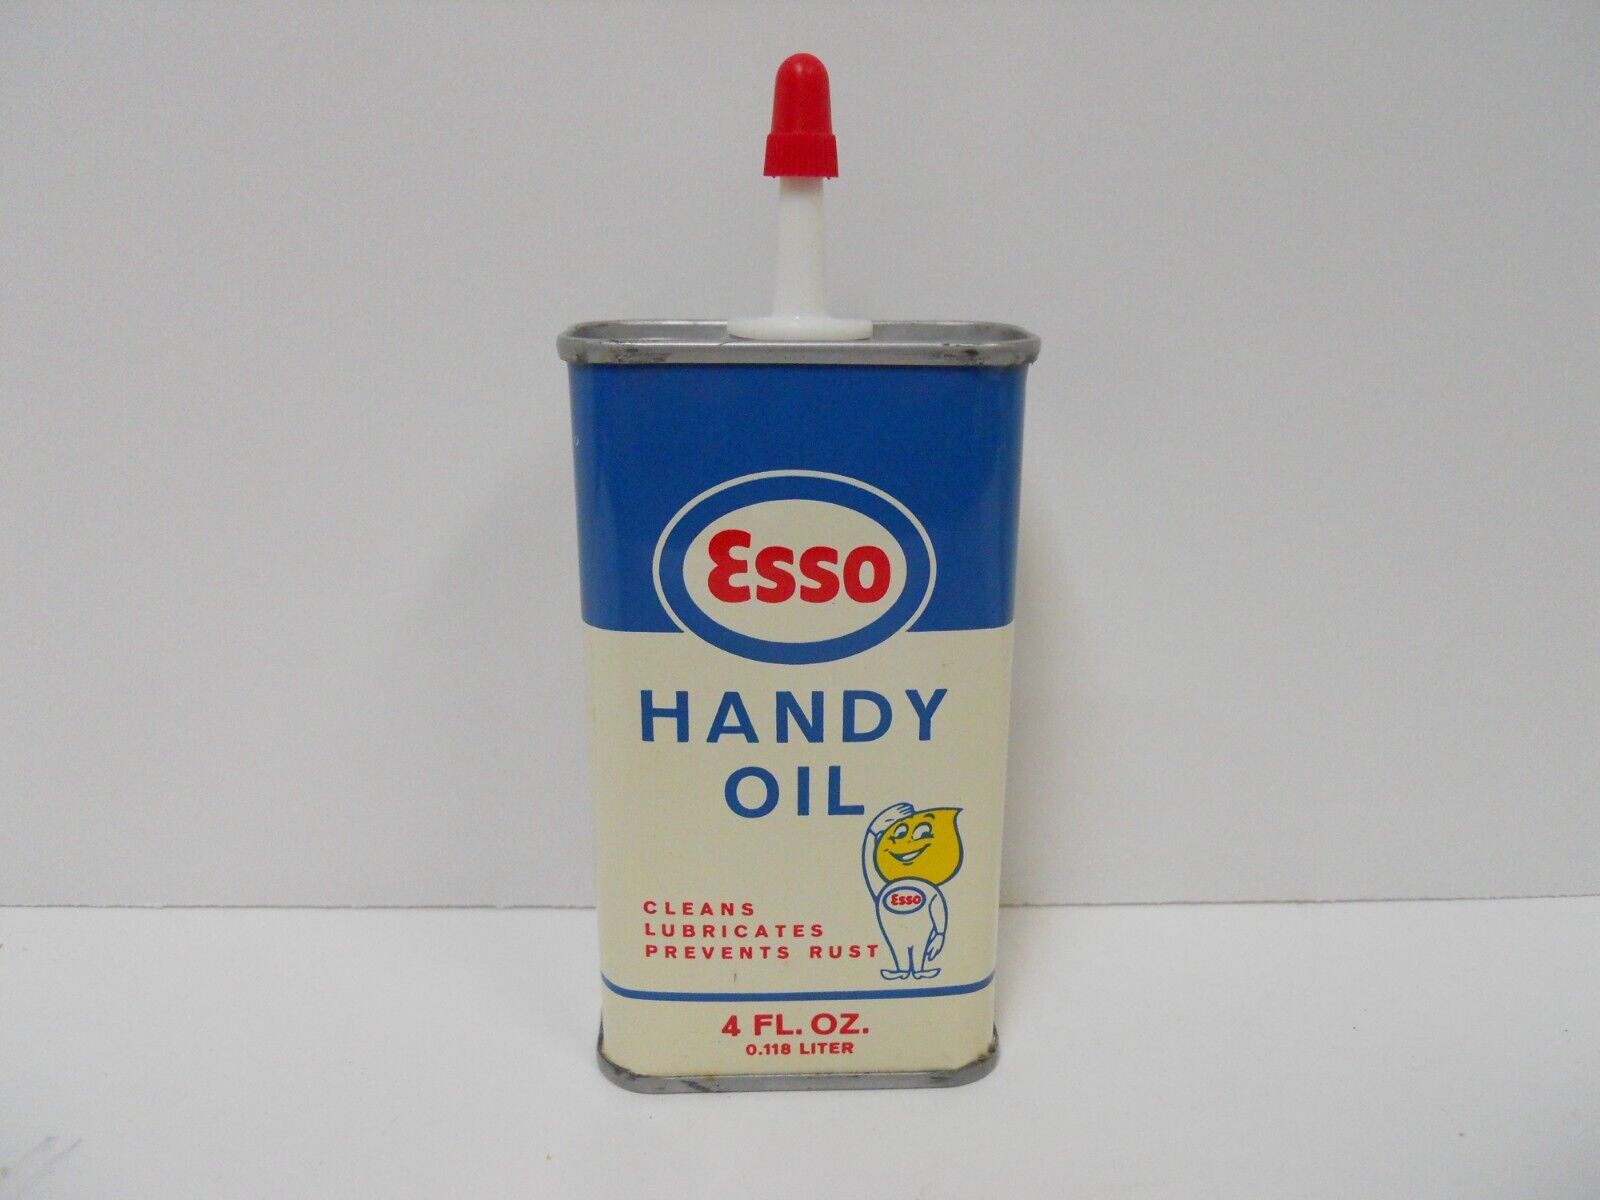 Vintage NOS (New Old Stock) ESSO / Humble 4 oz HANDY OIL Metal Can  Gas Station